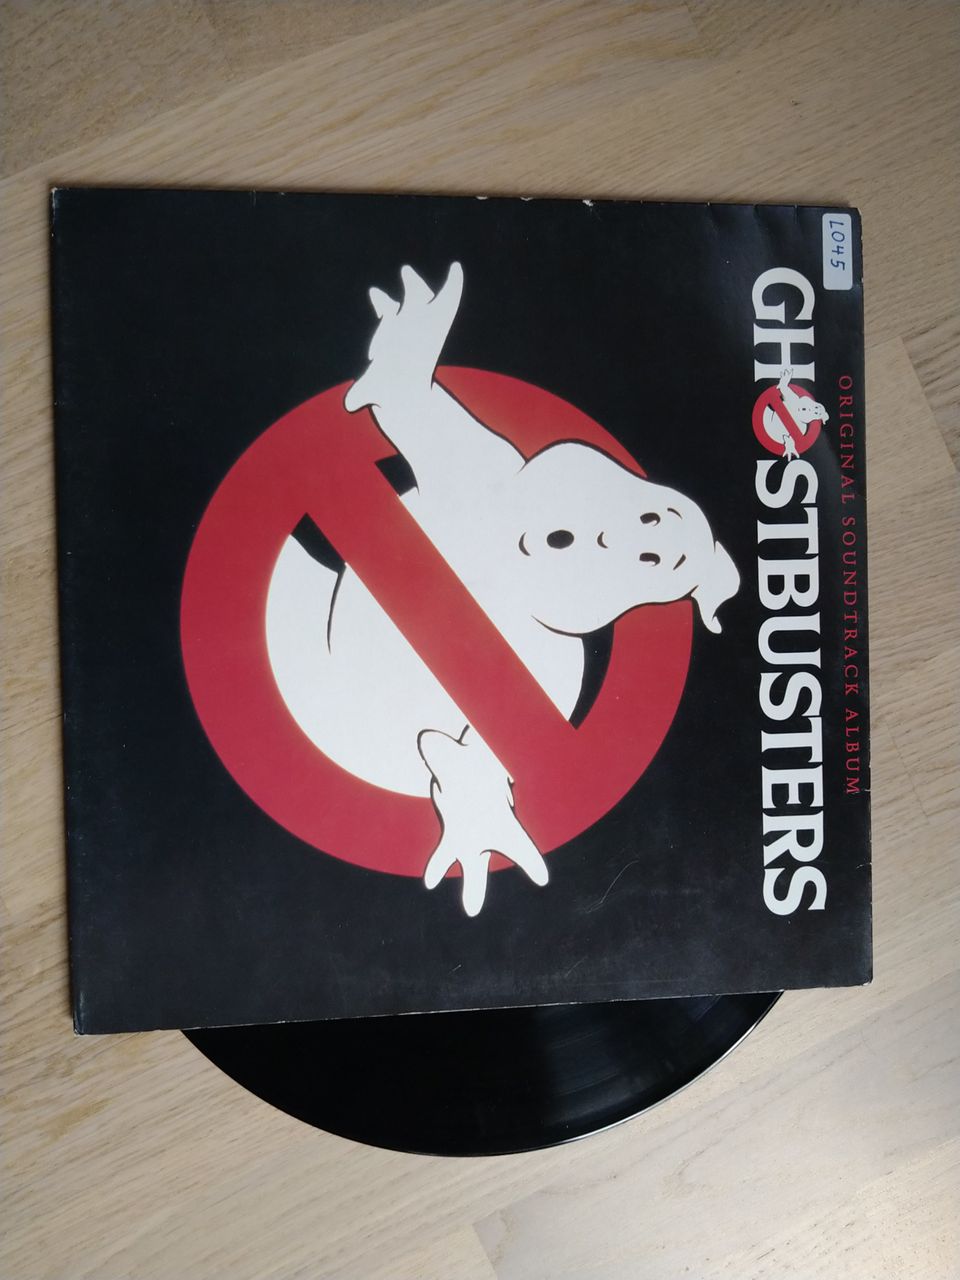 Ghostbusters - albumi